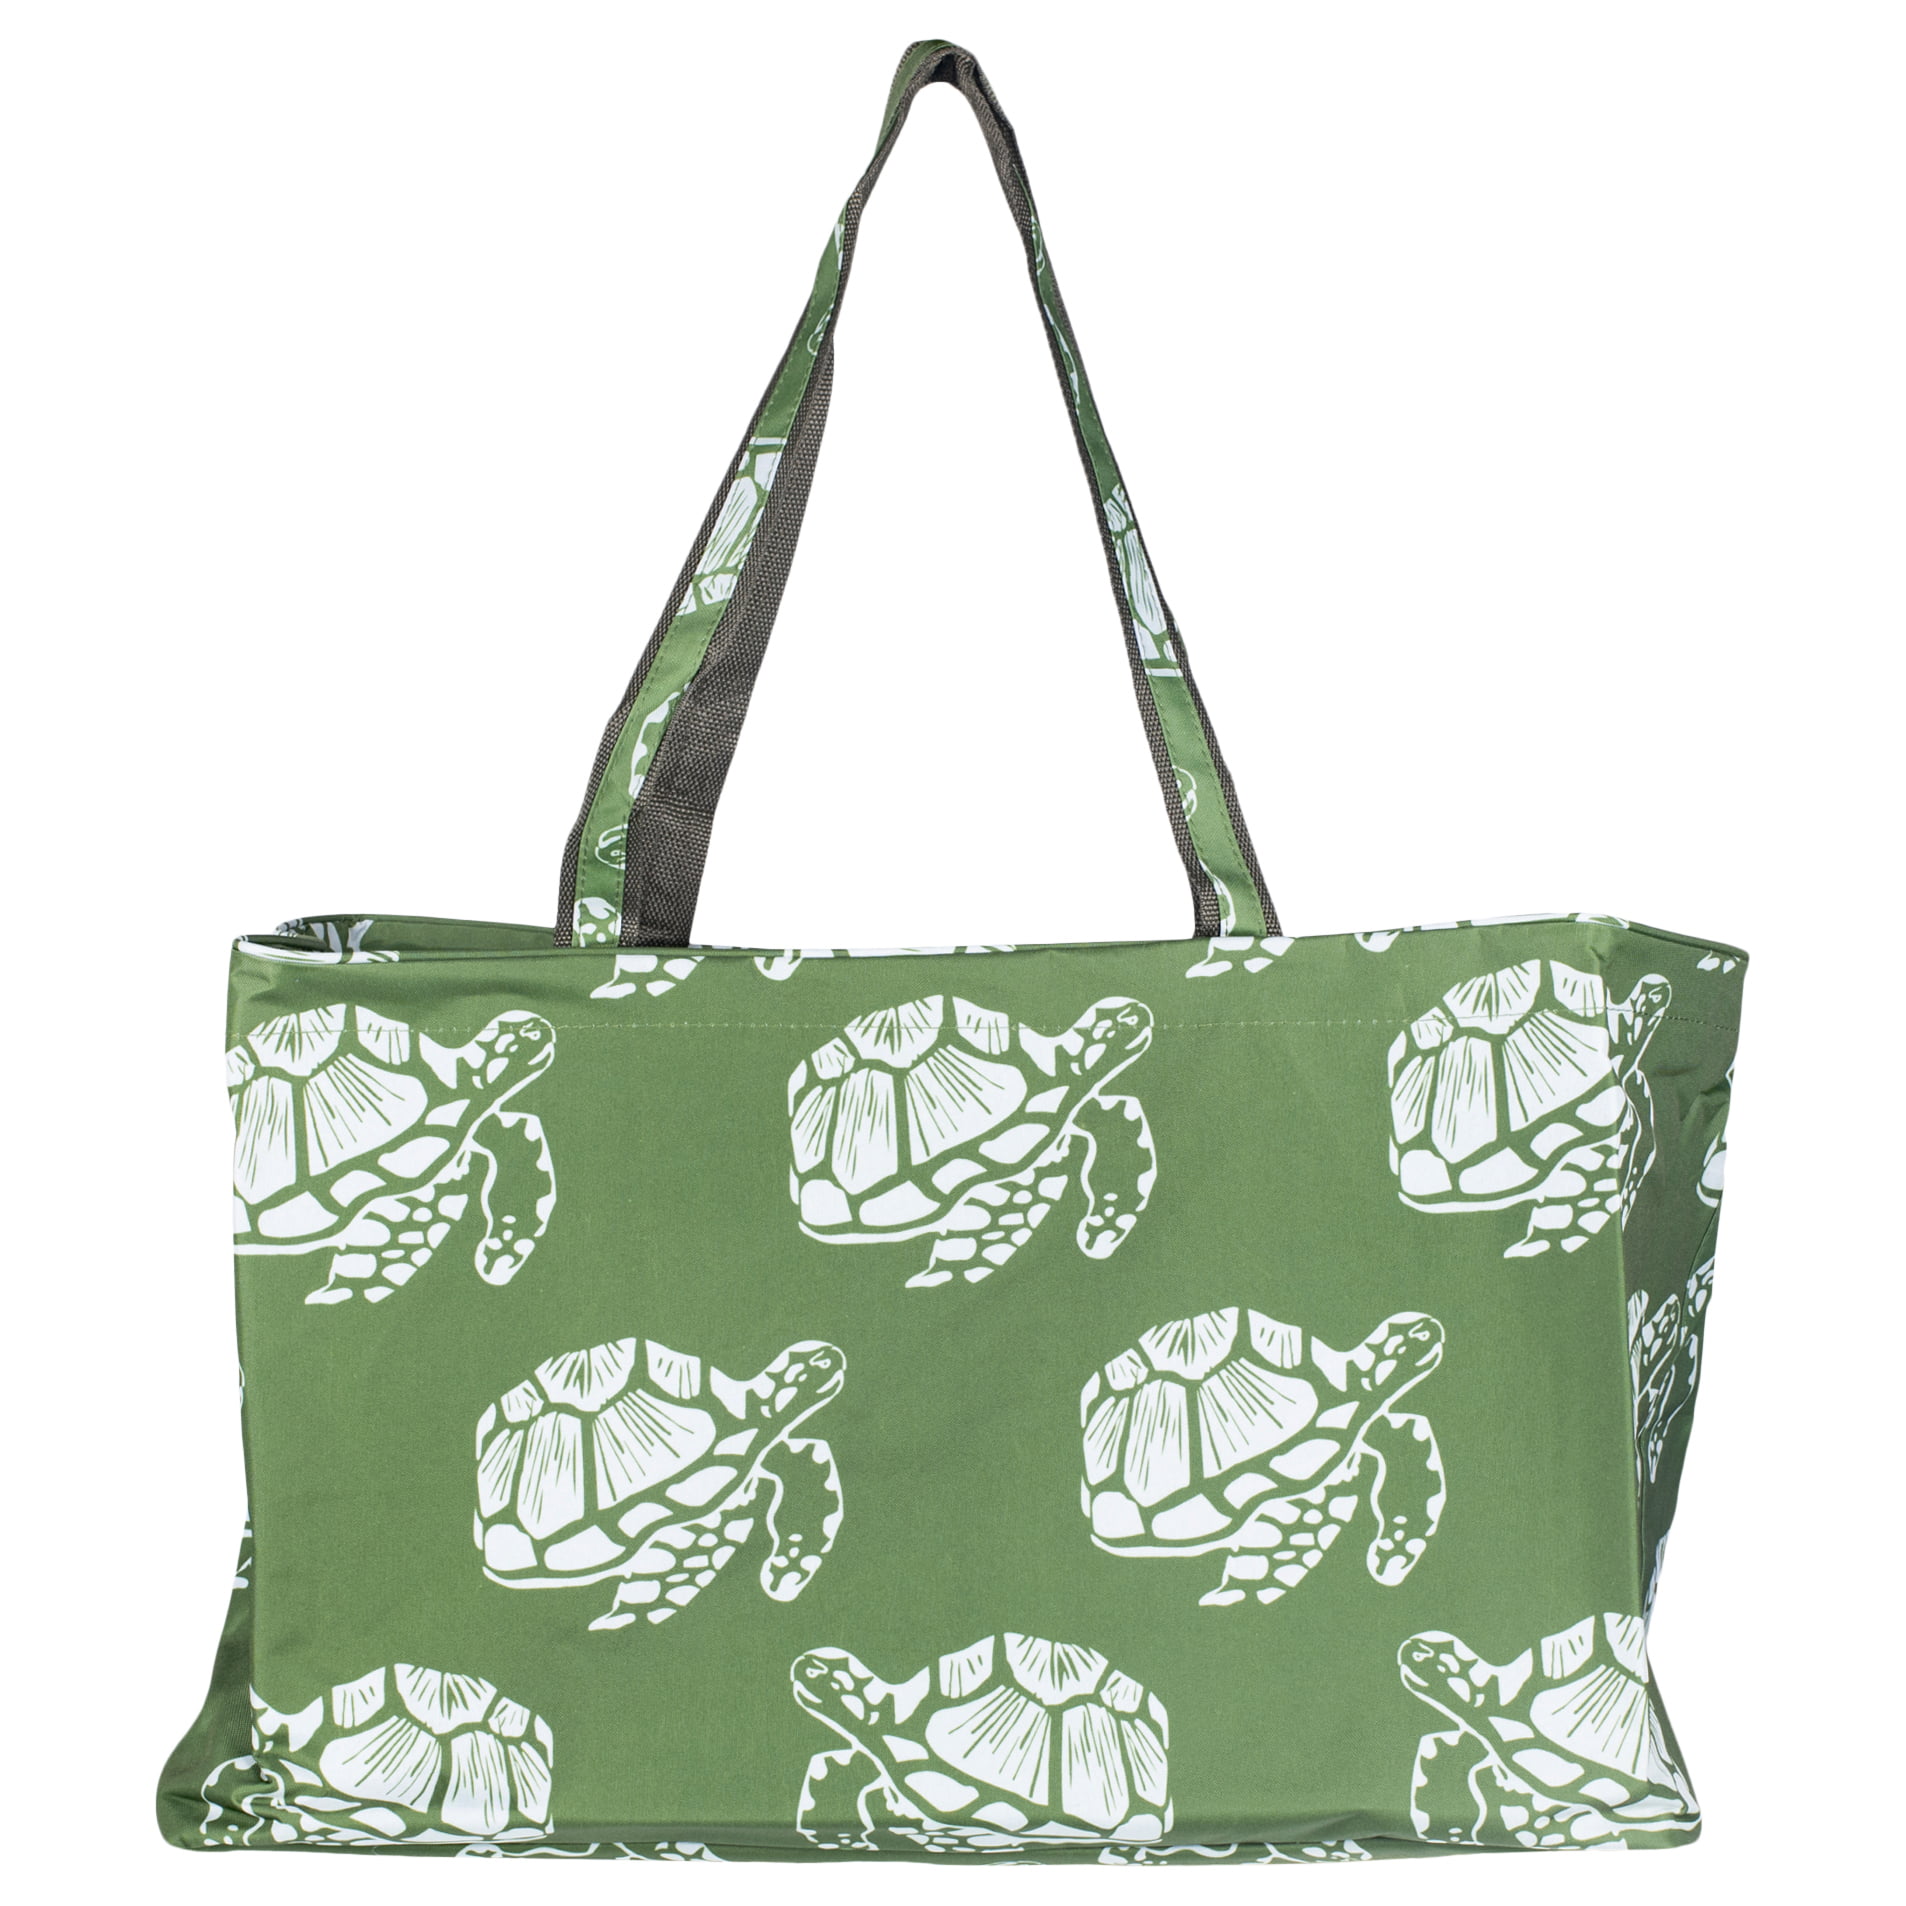 Details about   All Purpose Travel Laundry Shopping Zipper Utility Tote Bag Green Turtle